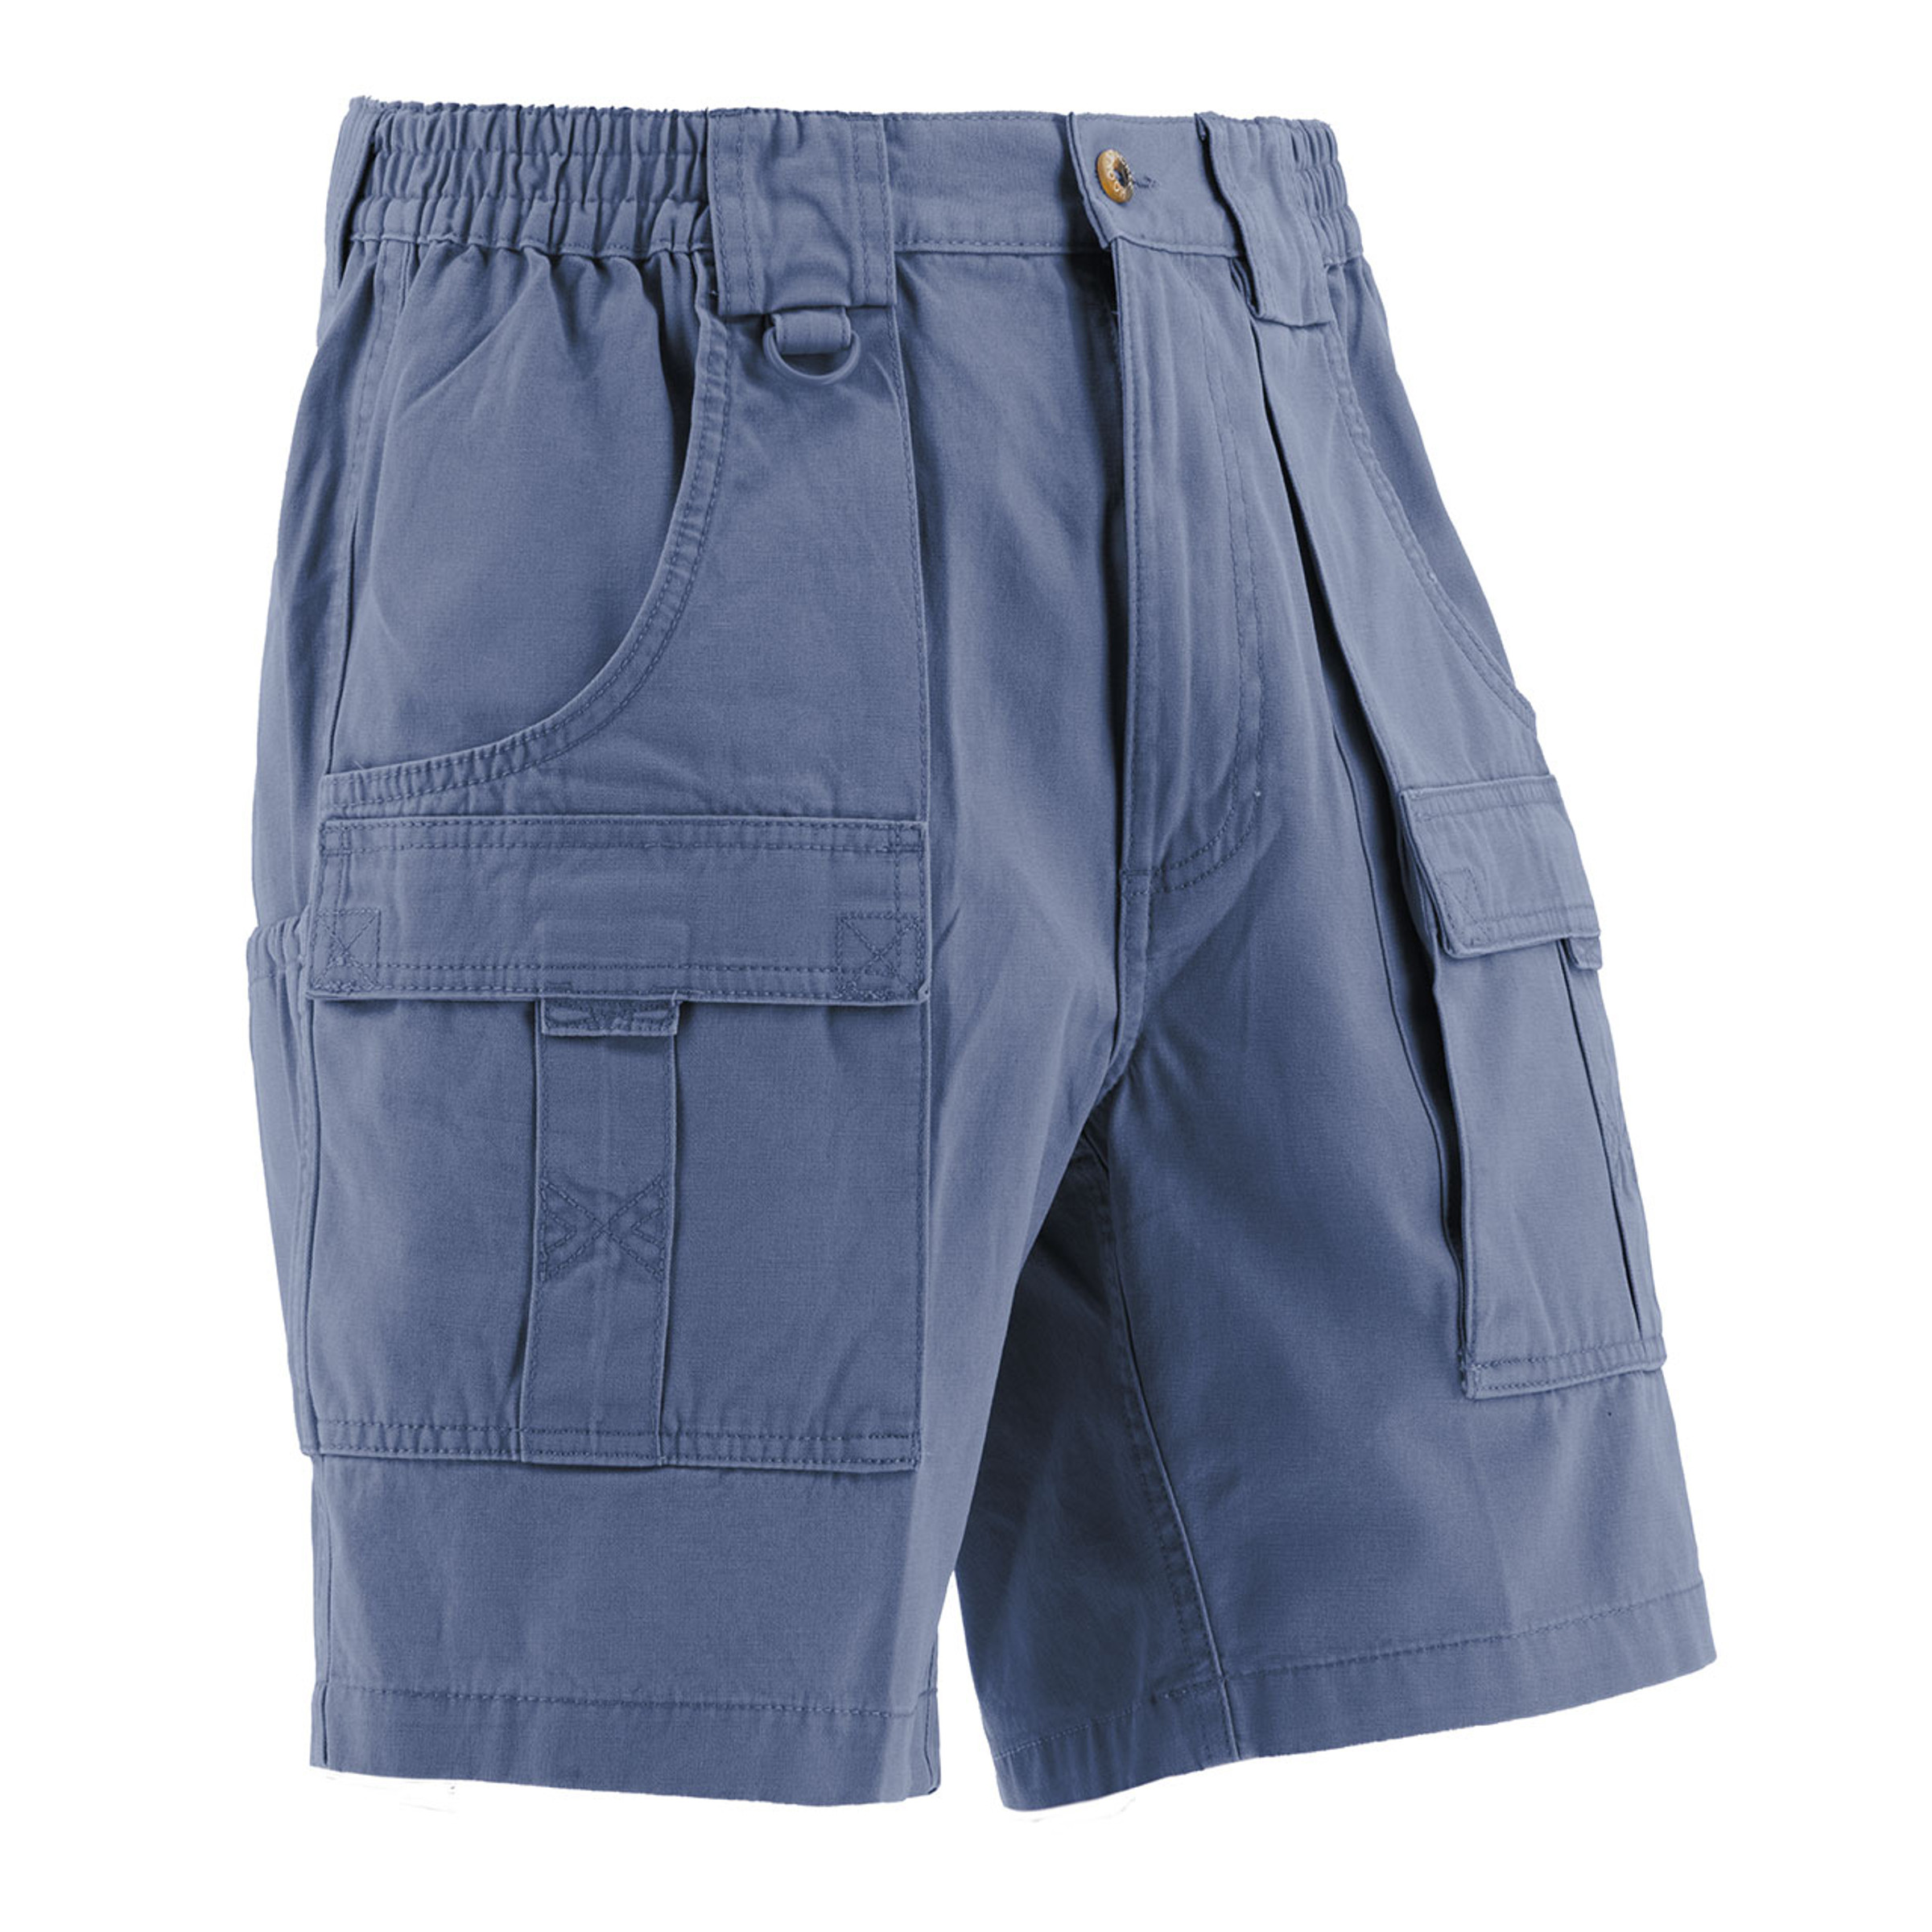 Hook & Tackle Beer Can Island® Cargo Short at Sportif